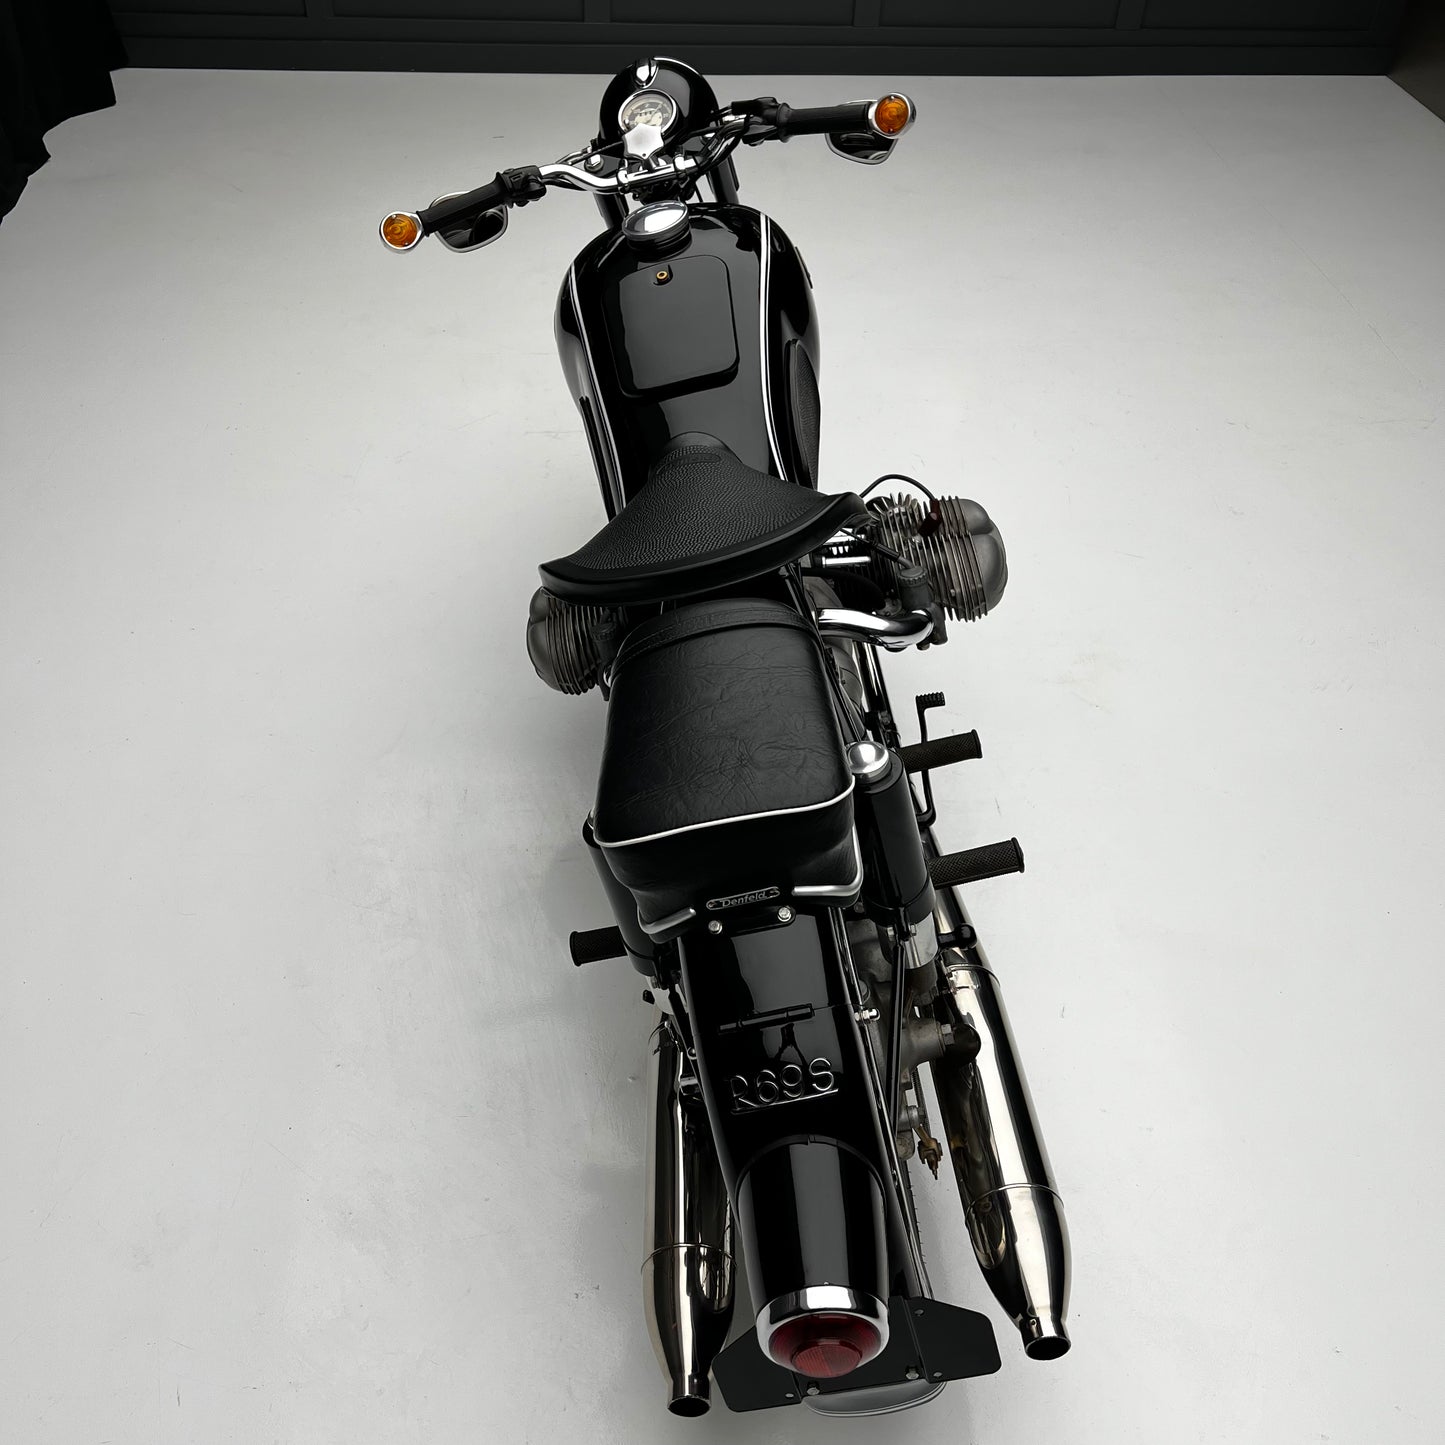 Load image into Gallery viewer, 1969 BMW R69S